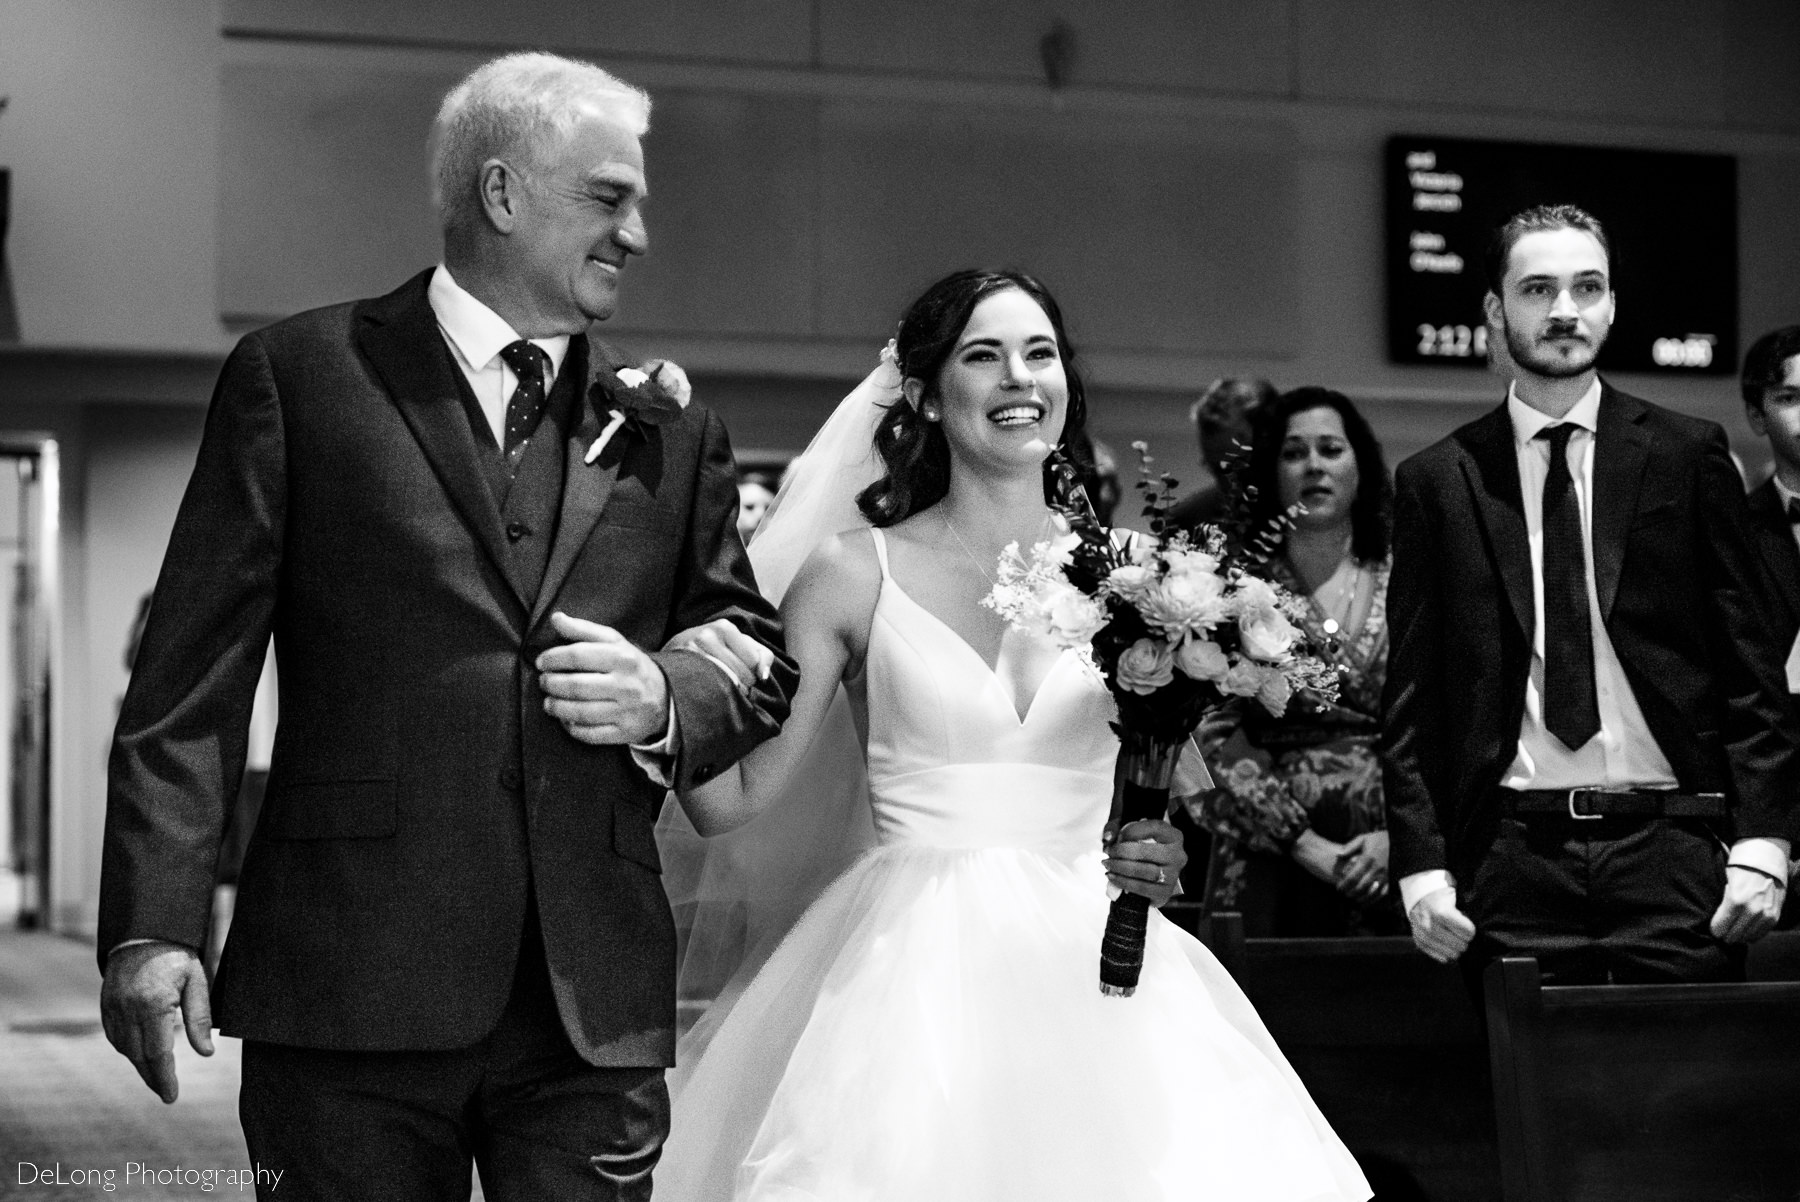 Father of the bride smiling while looking at his daughter who is joyfully smiling at her groom as they walk down the aisle at St Gabriel Catholic Church by Charlotte wedding photographers DeLong Photography